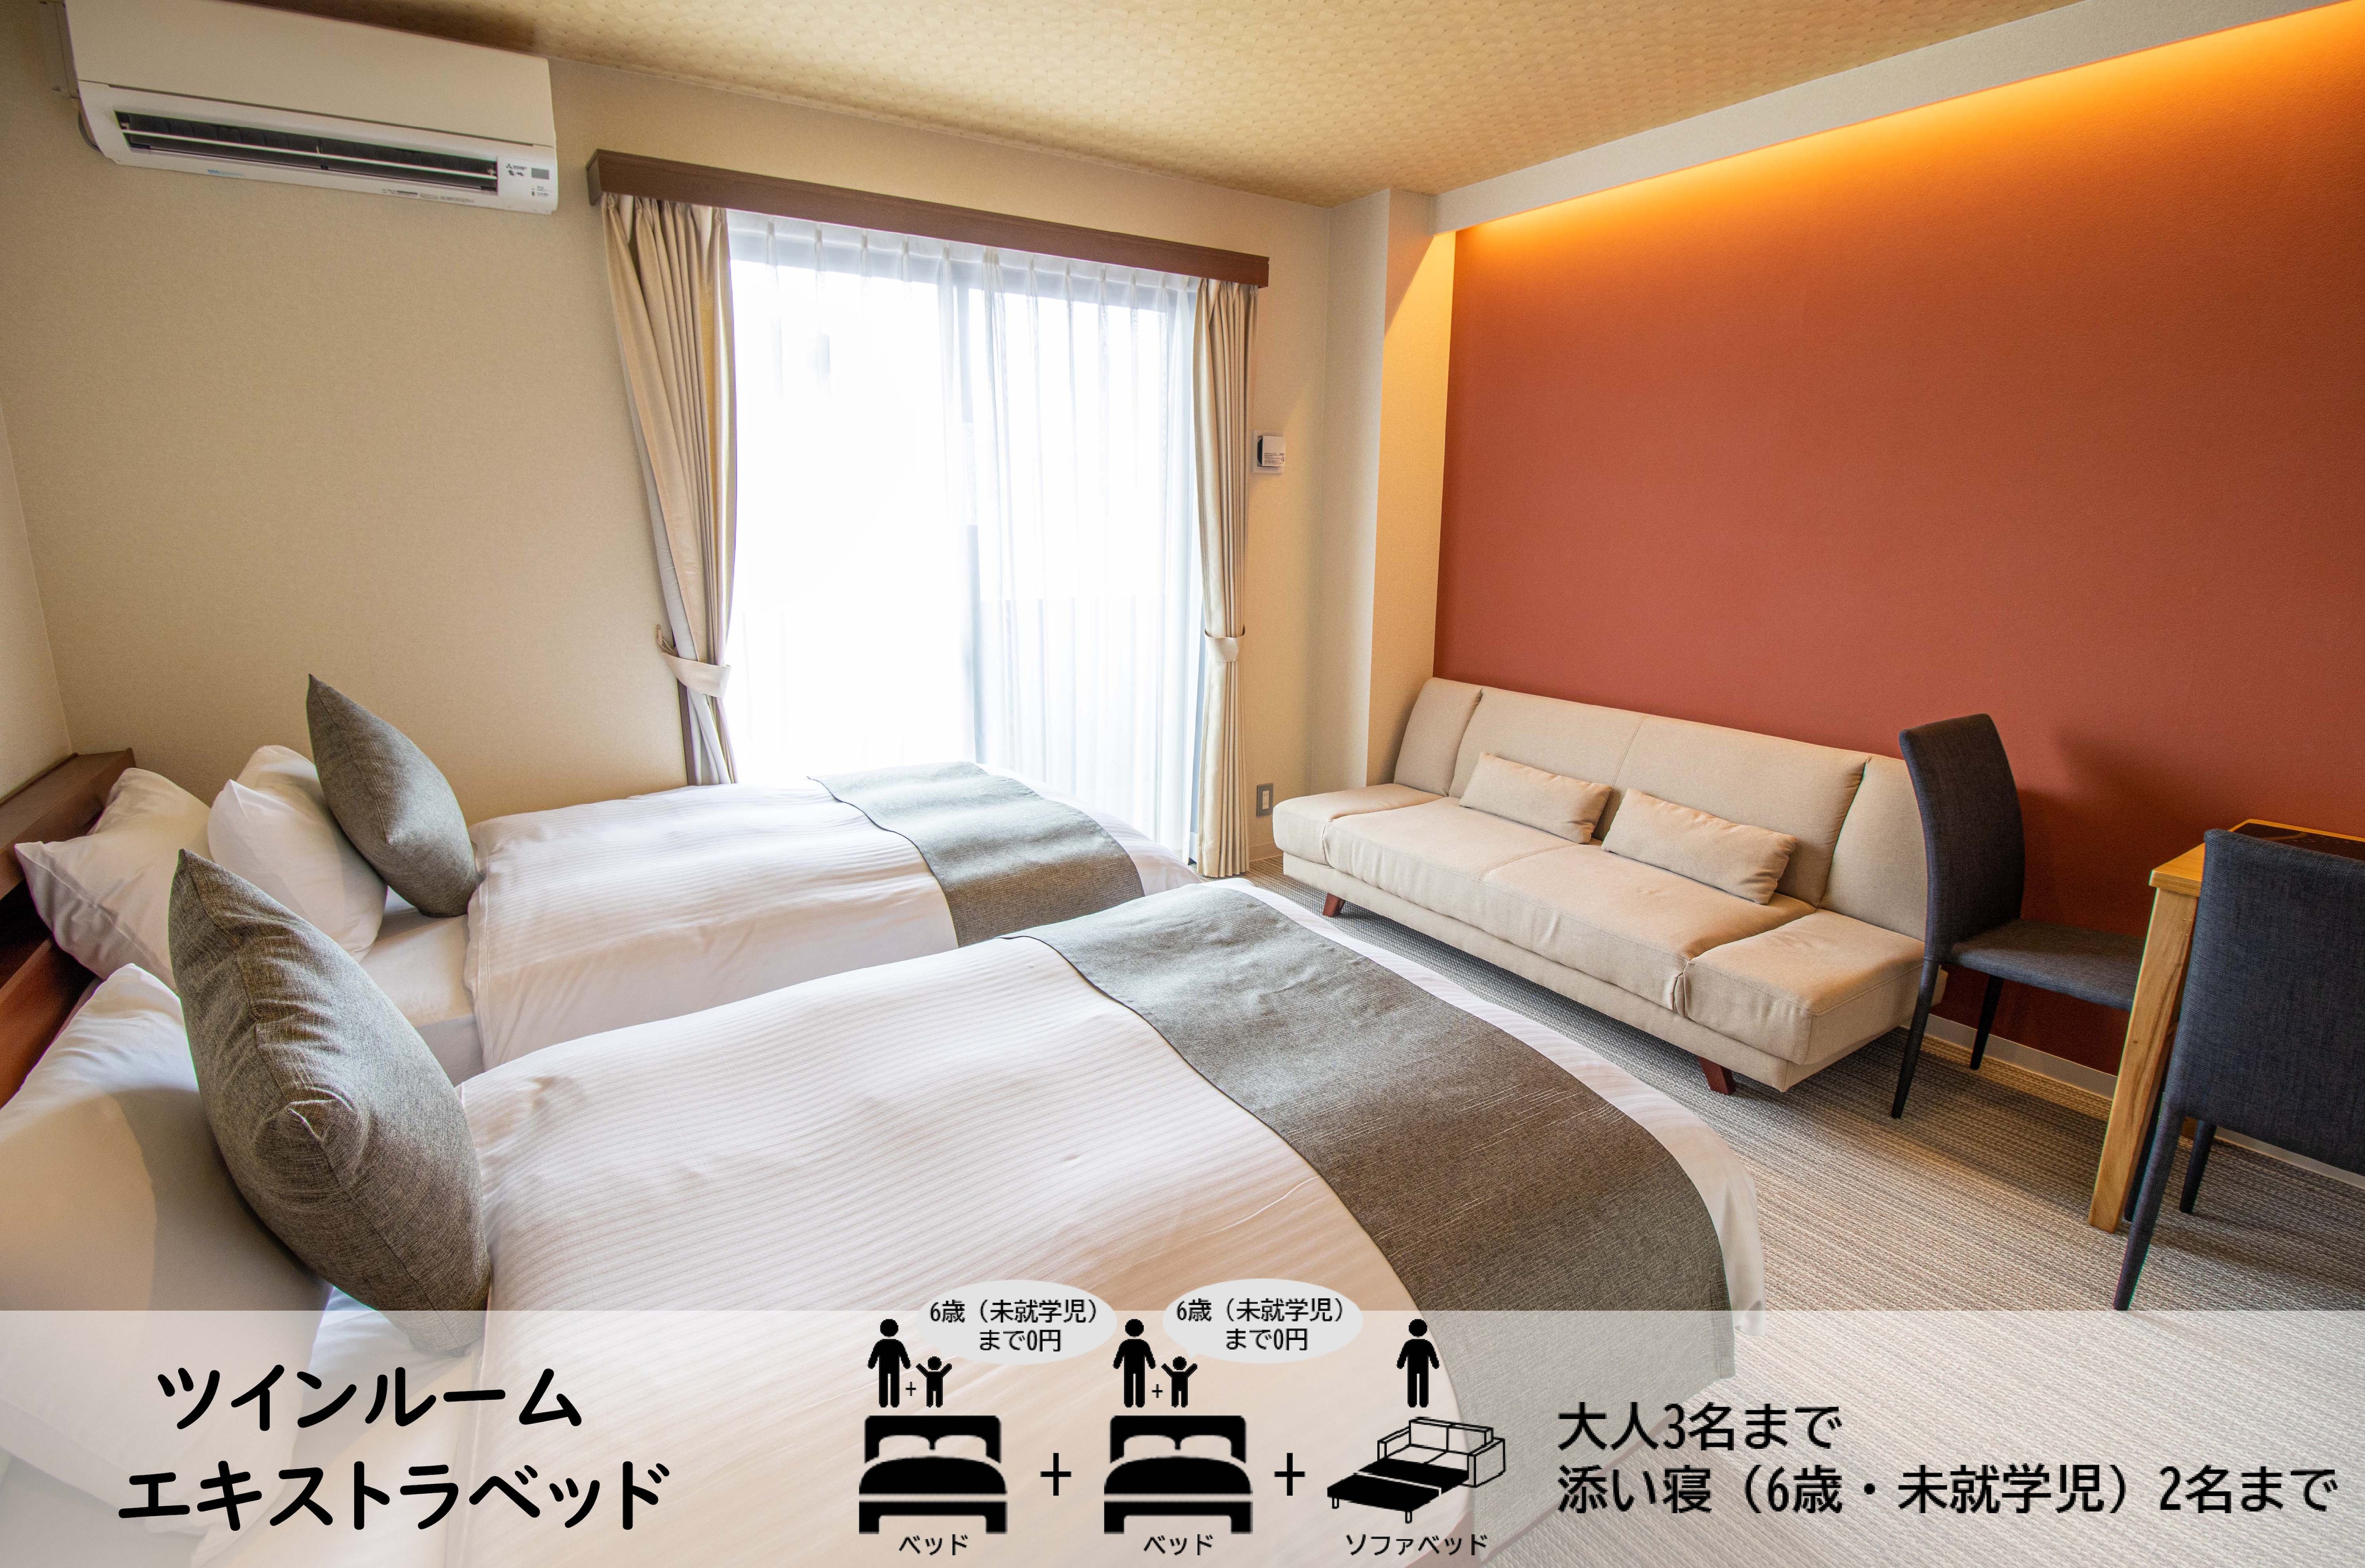 Twin room with extra bed